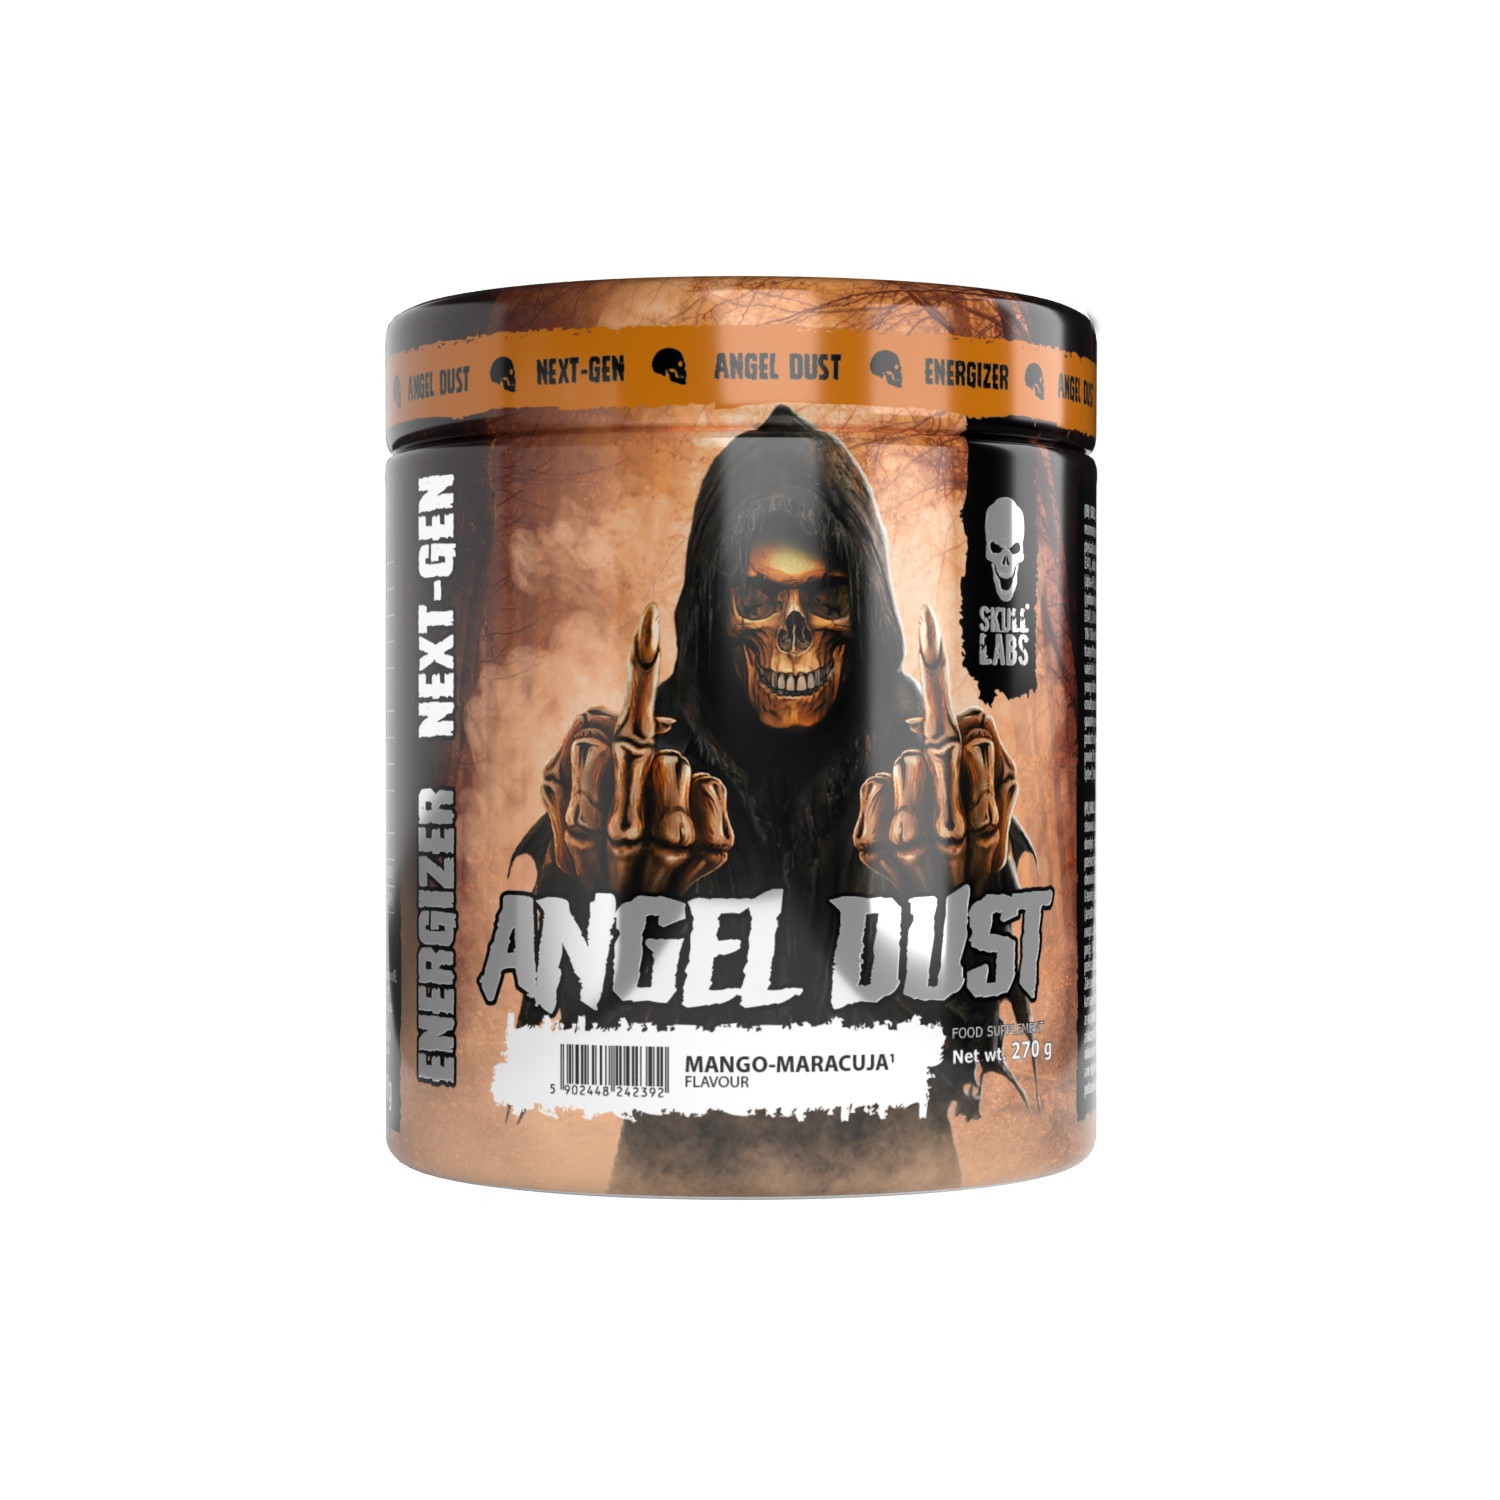 15 Minute Angel dust pre workout for Beginner